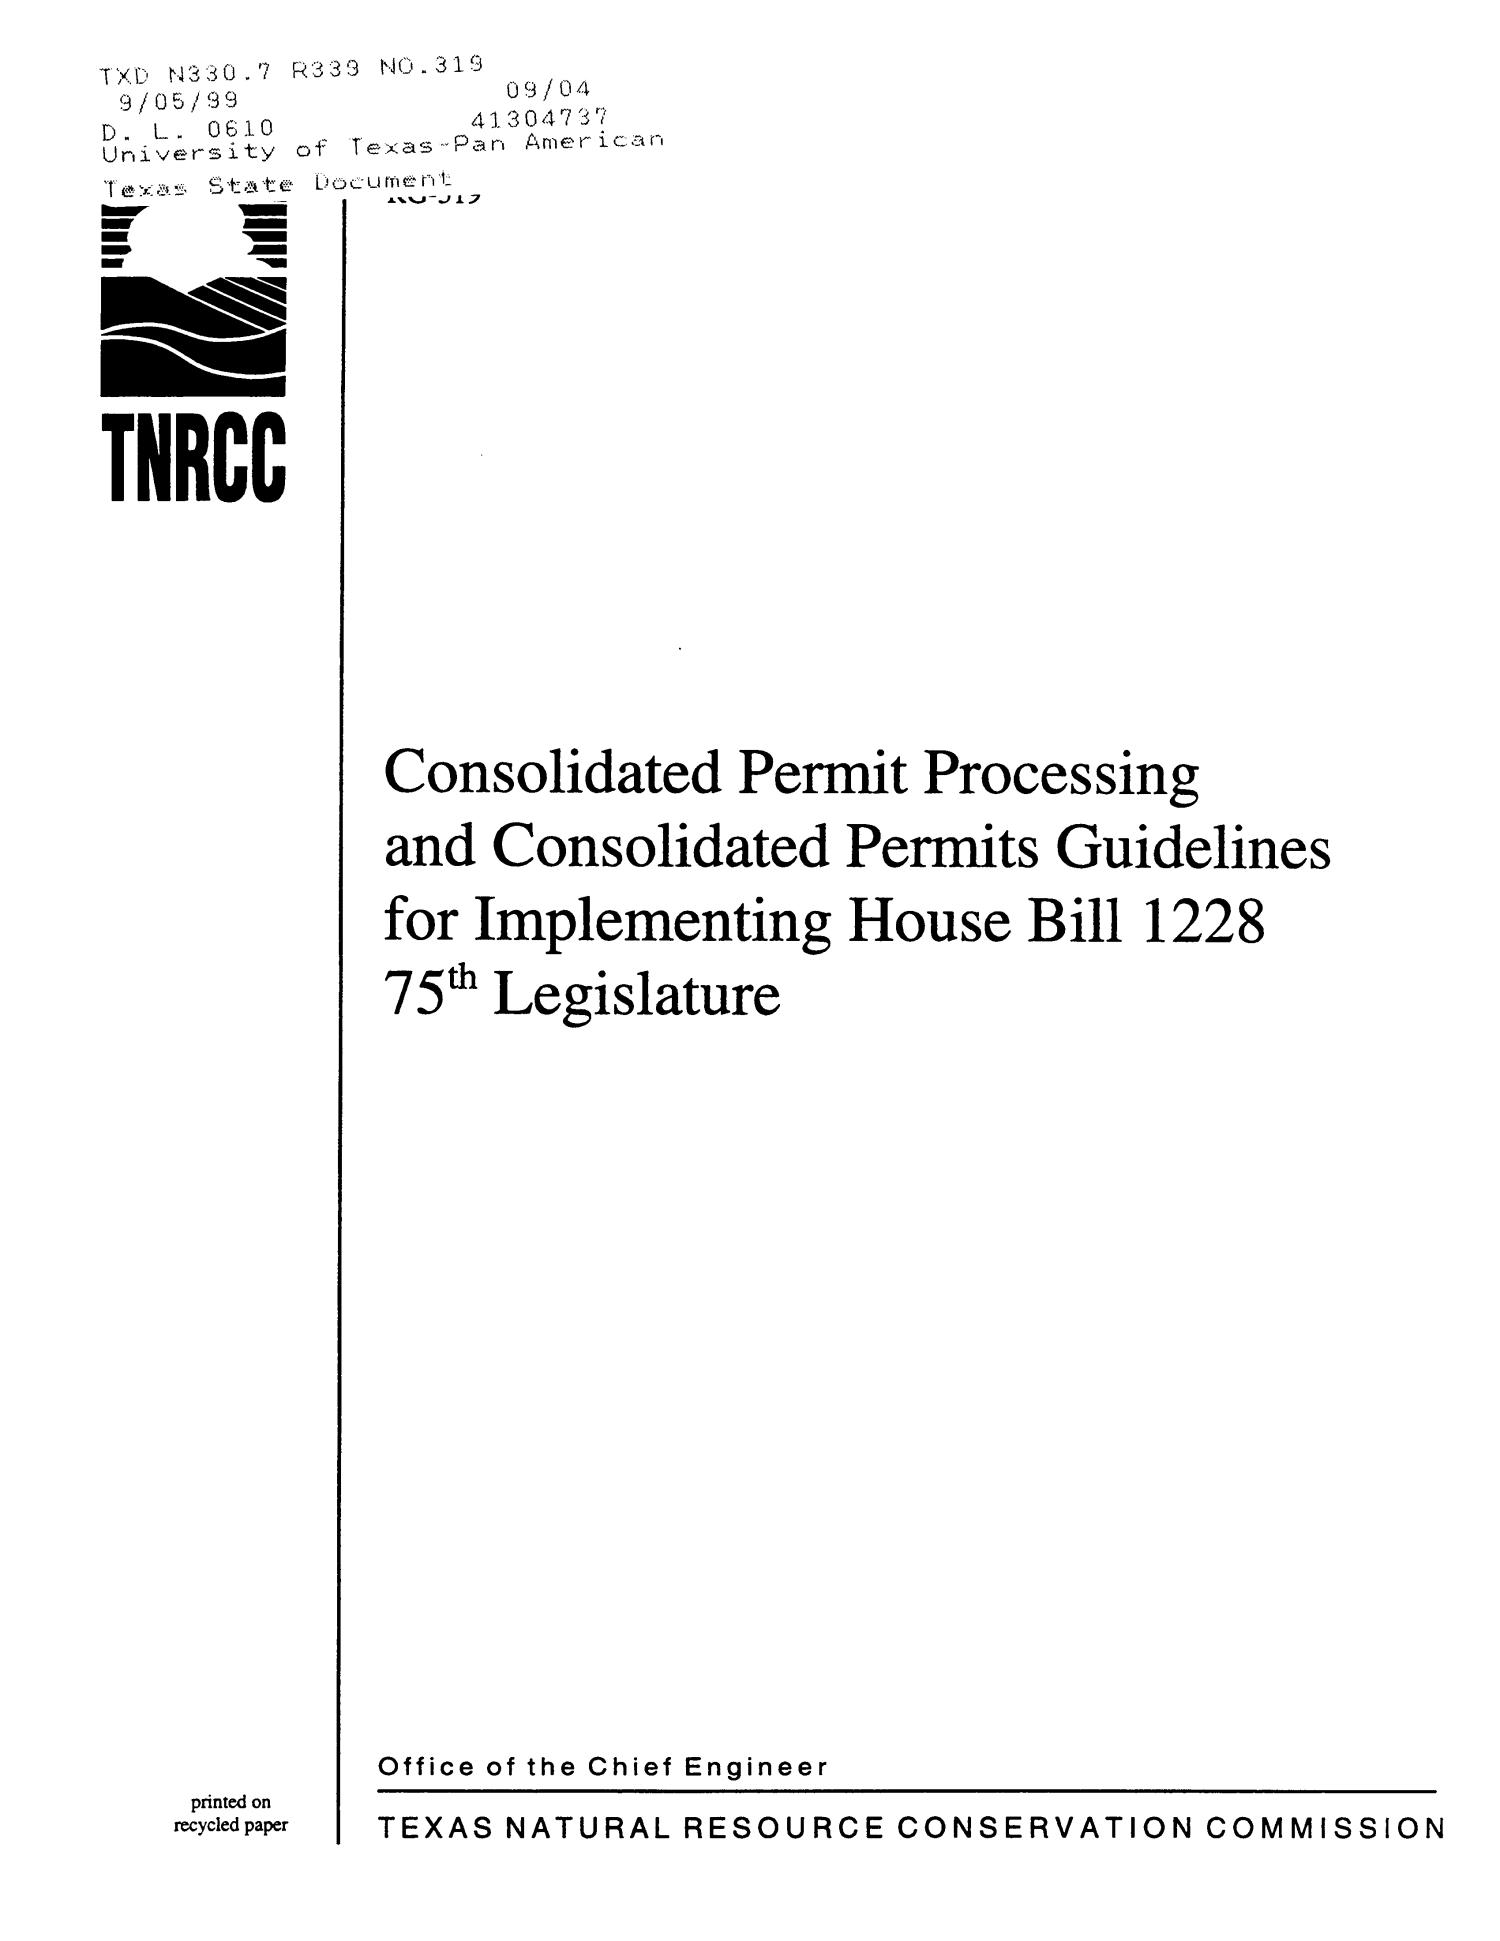 Consolidated Permit Processing and Consolidated Permits Guidelines for Implementing House Bill 1228, 75th Legislature
                                                
                                                    [Sequence #]: 1 of 44
                                                